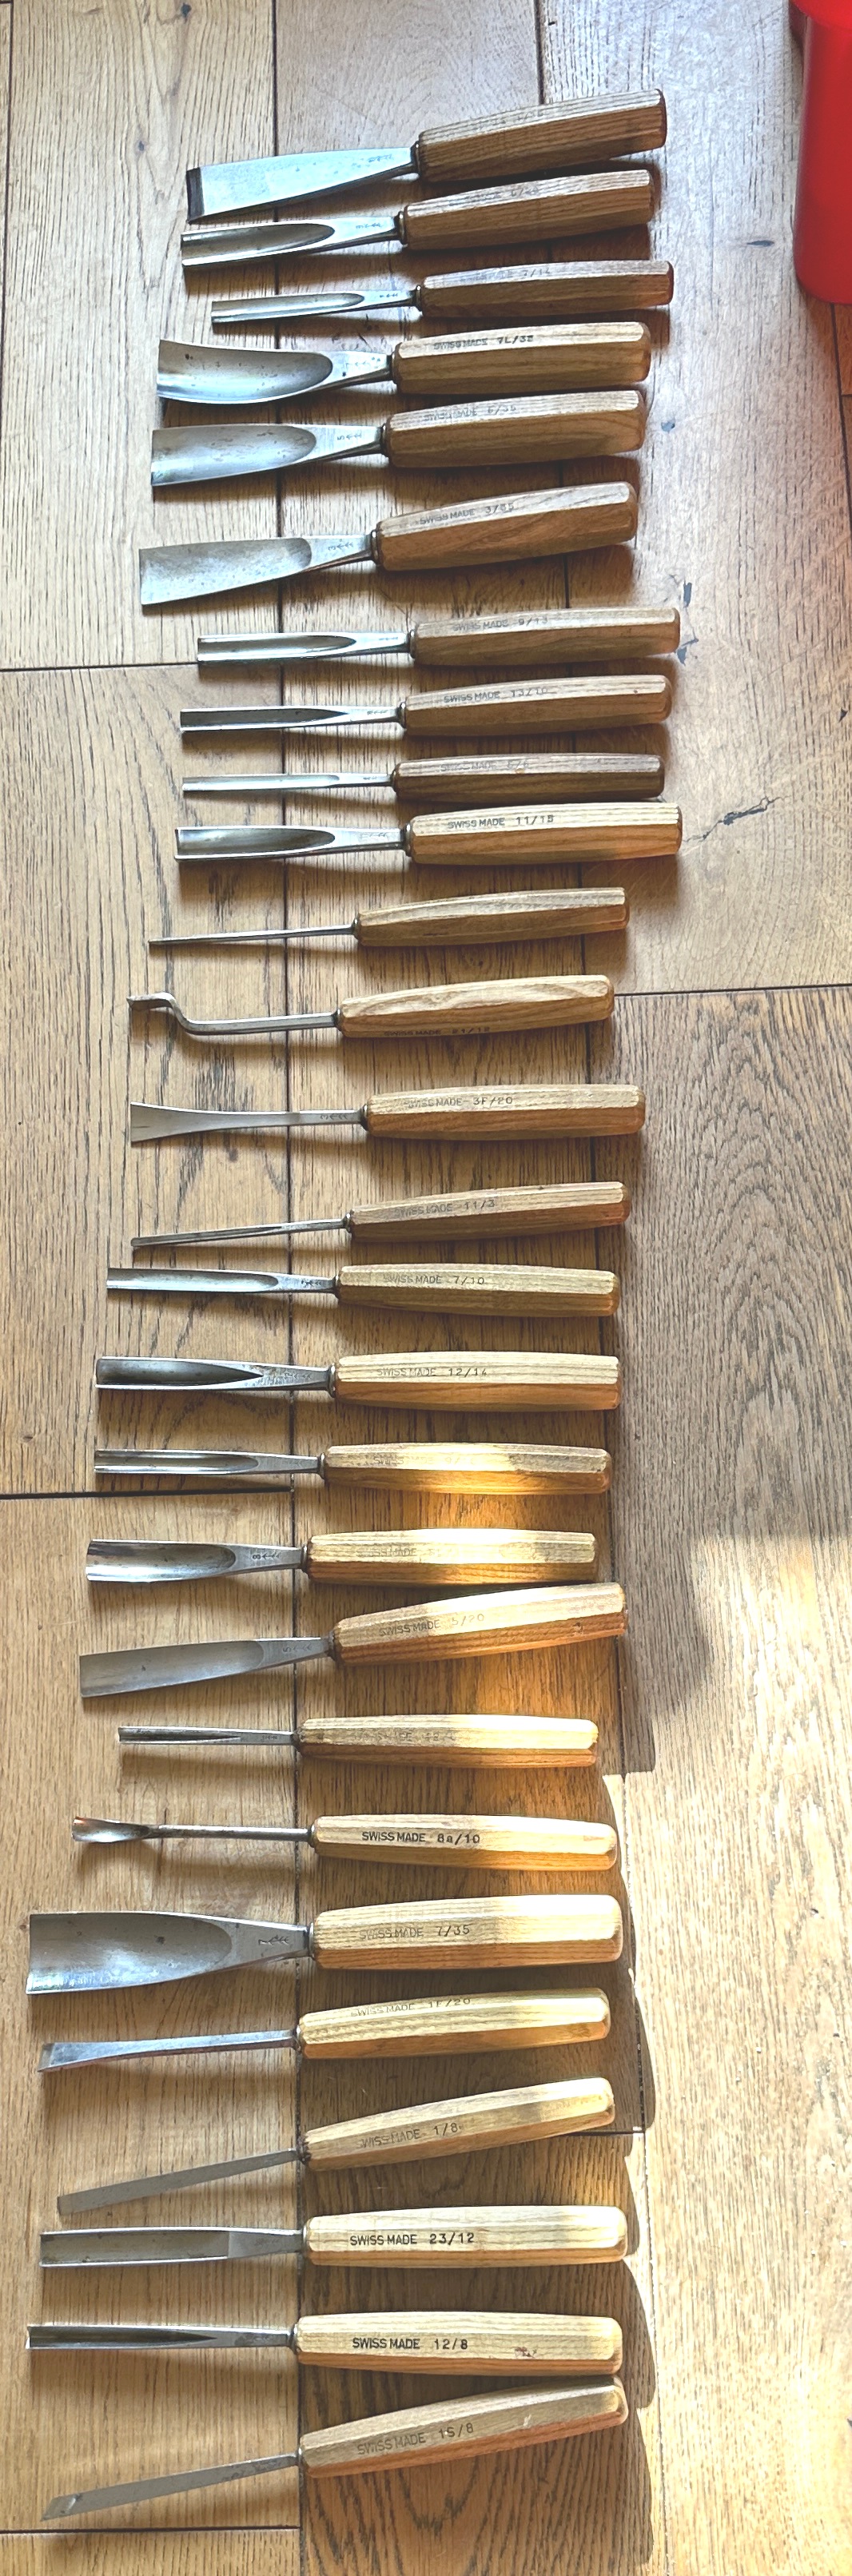 Lot of 27 Swiss Made Woodworking Chisels. - Image 2 of 12